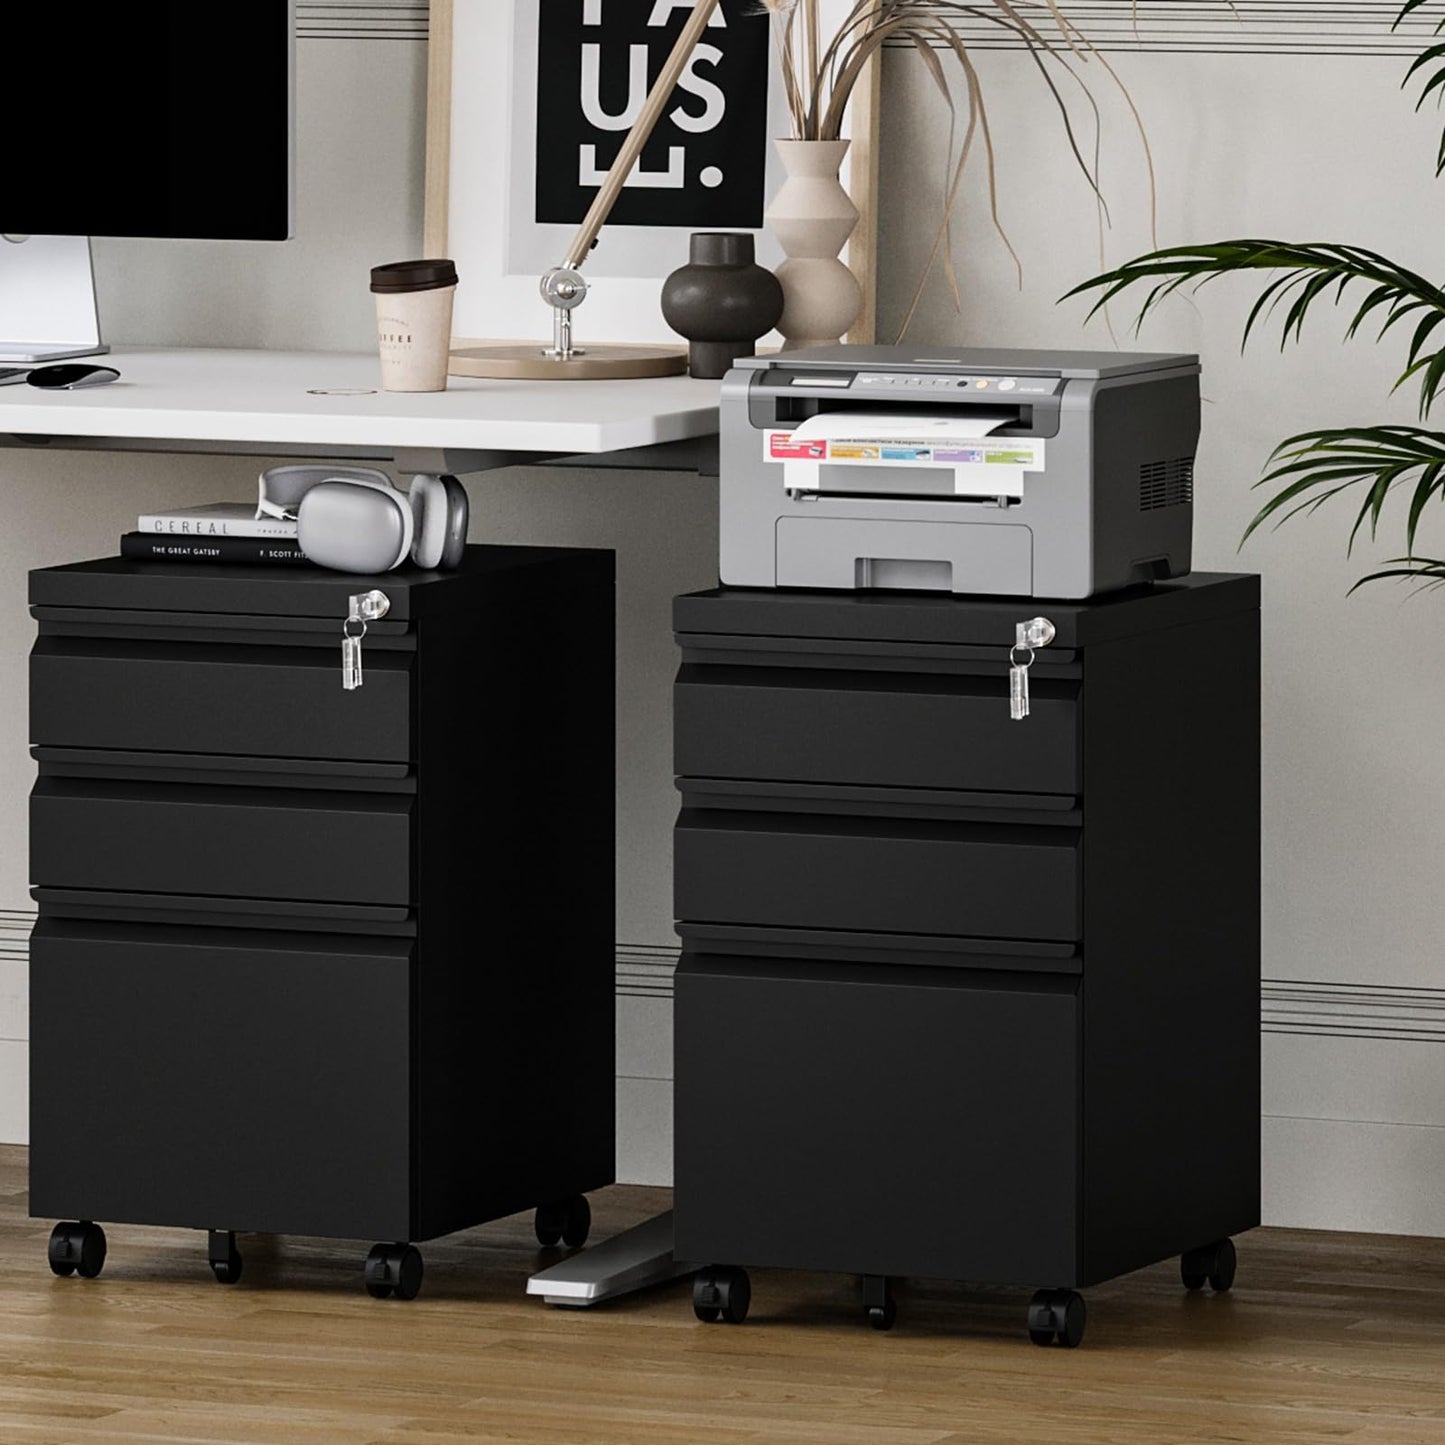 MIIIKO File Cabinet 3 Drawers on Wheels Under Desk, Black Metal Rolling File Cabinets with Lock for Home Office